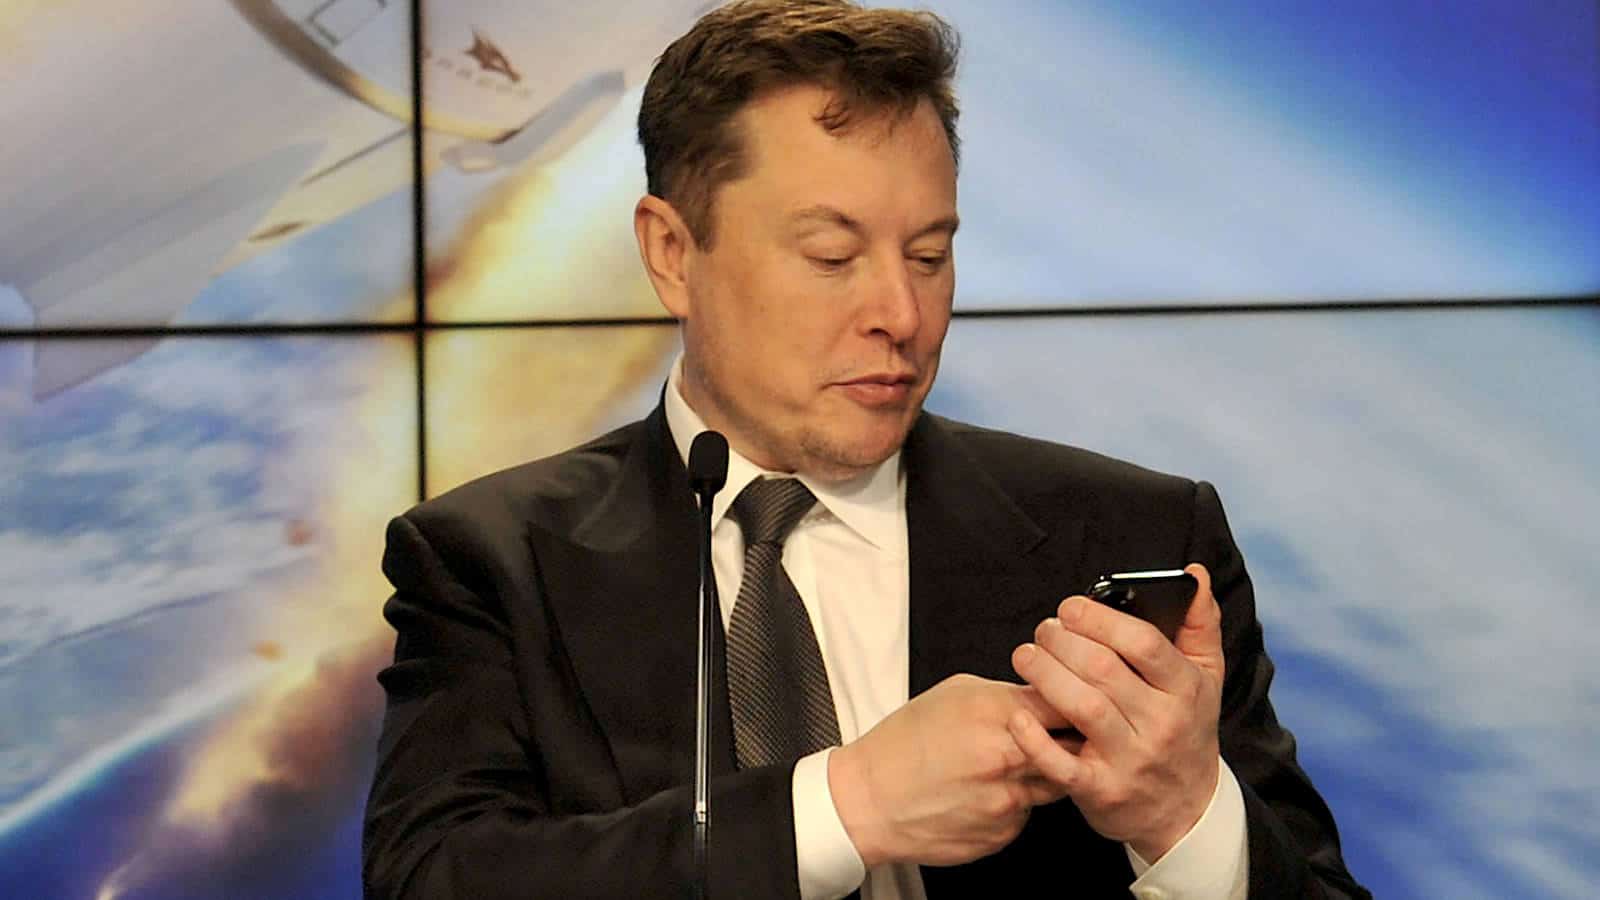 Woman With Elon Musk&#39;s Phone Number Gets Strange Text Messages